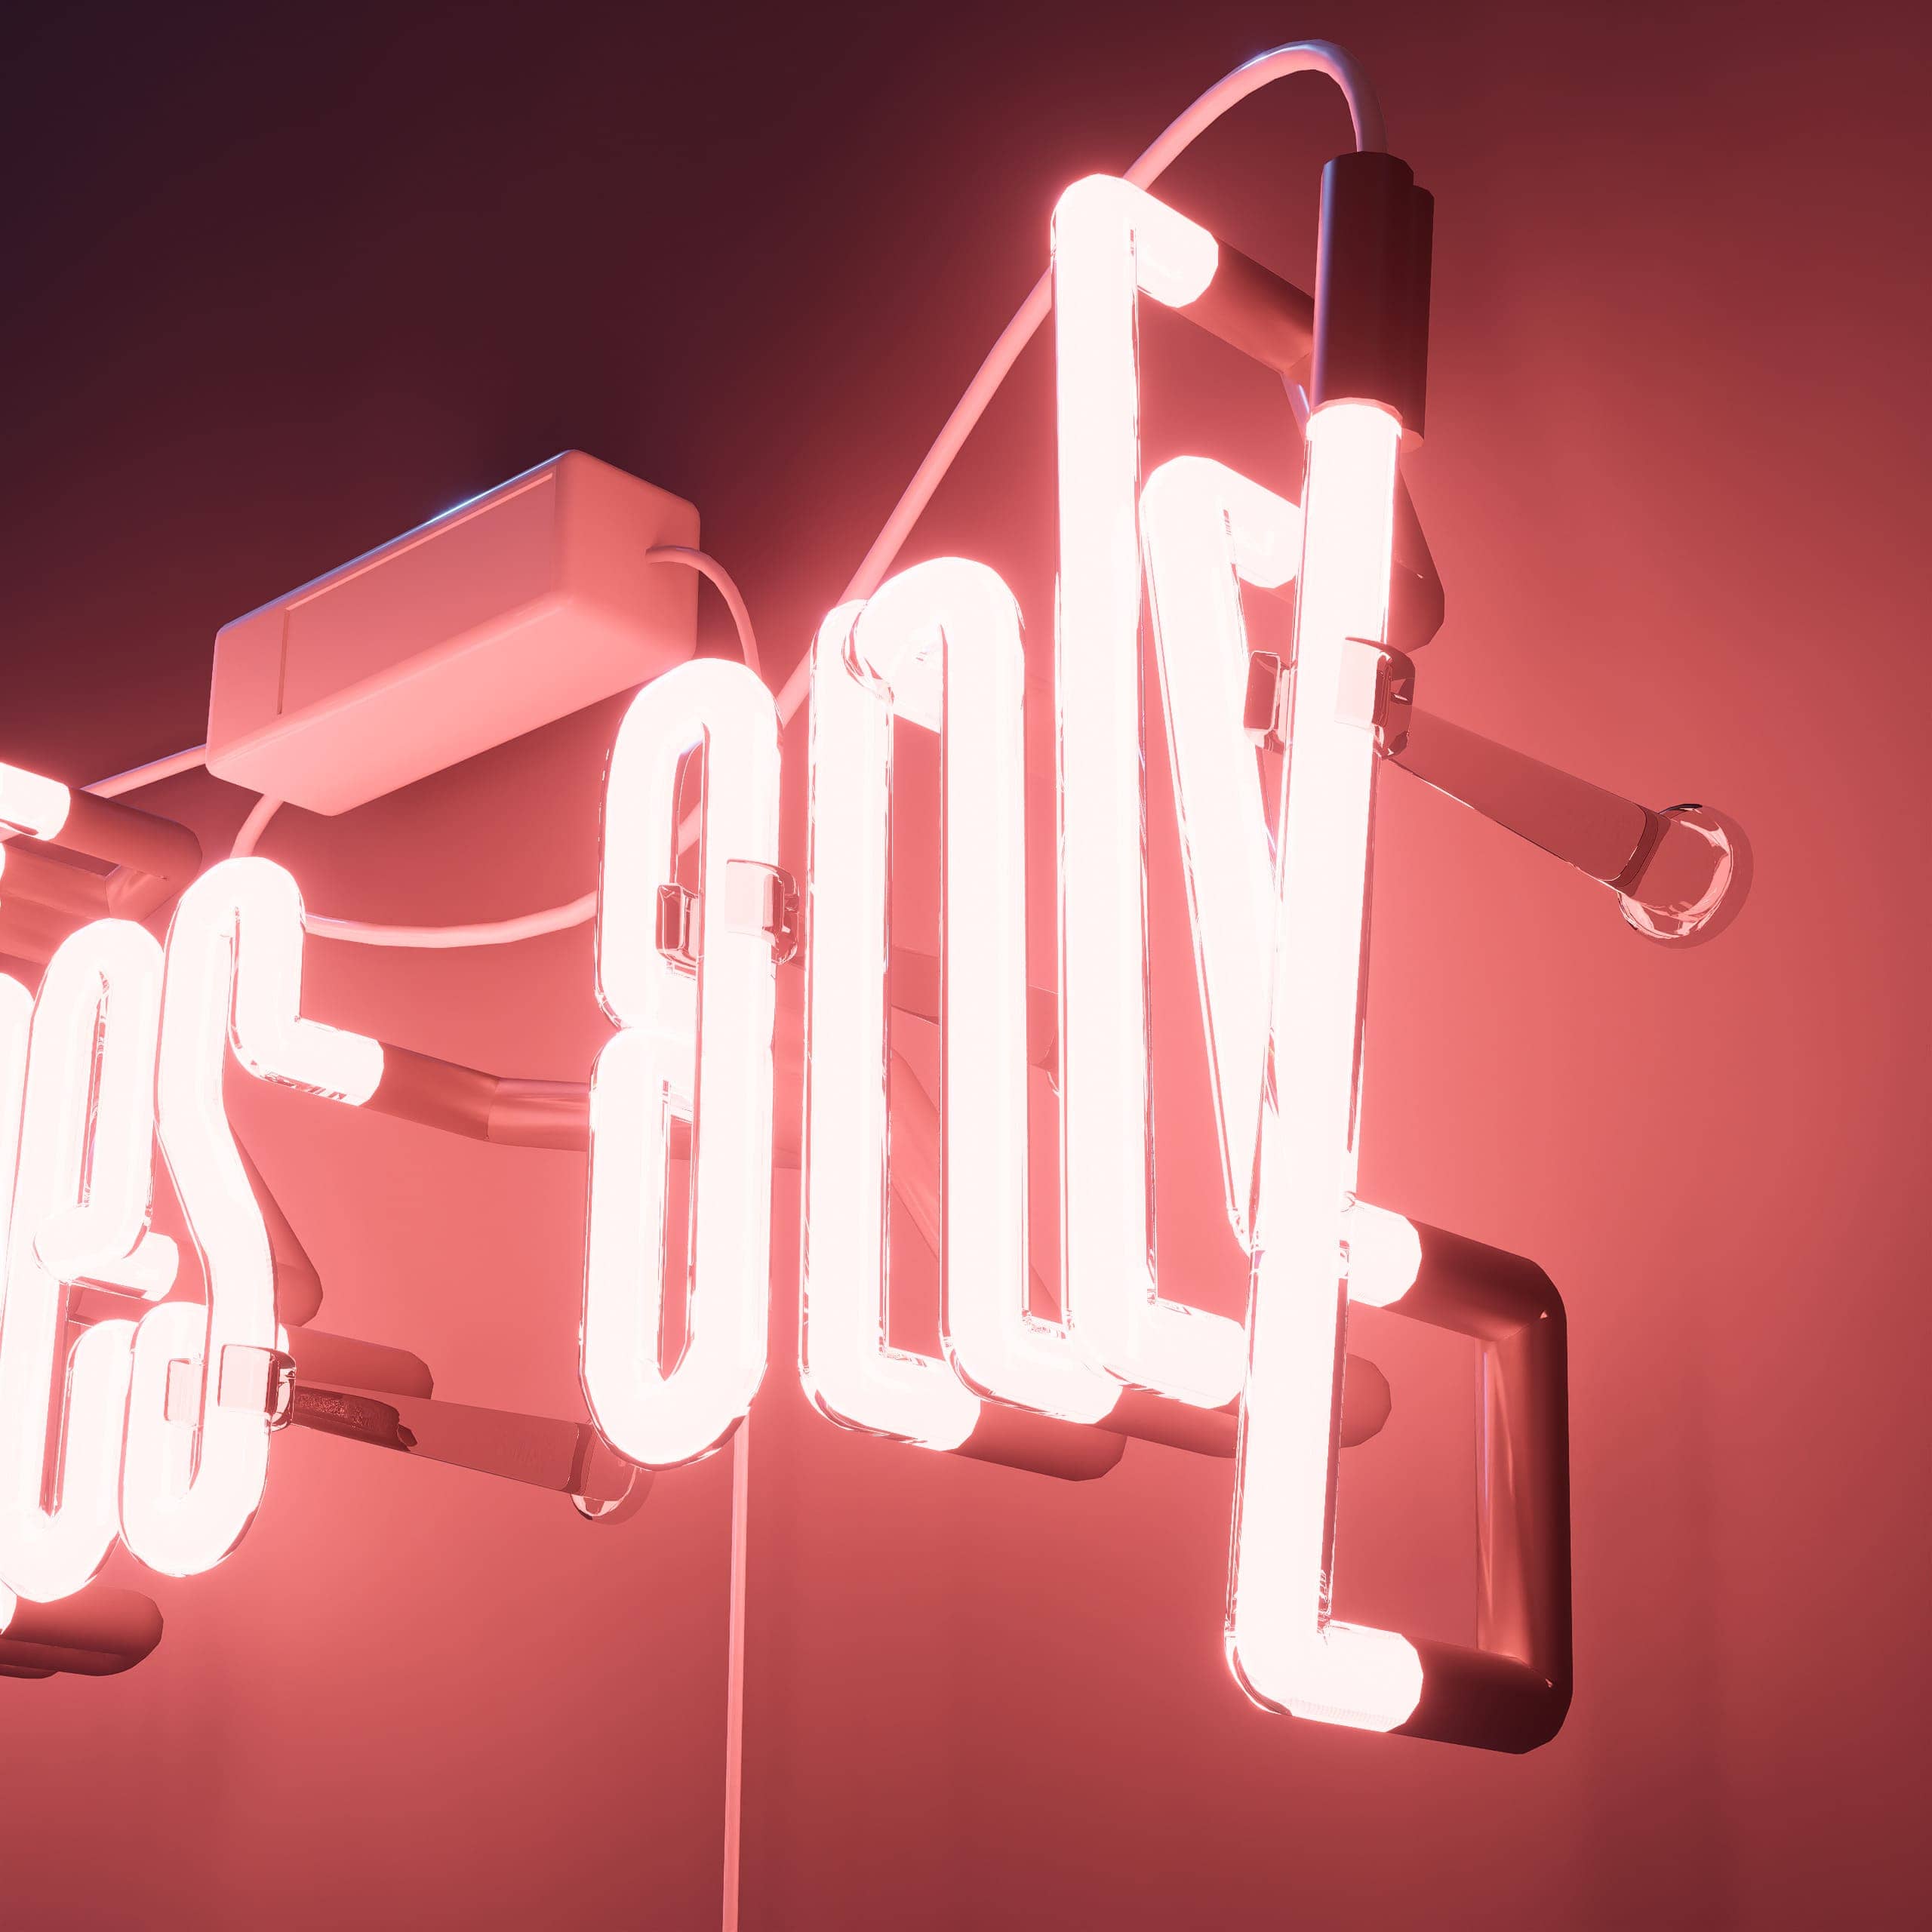 vintage-neon-signs-inspire-'good-vibes-only'